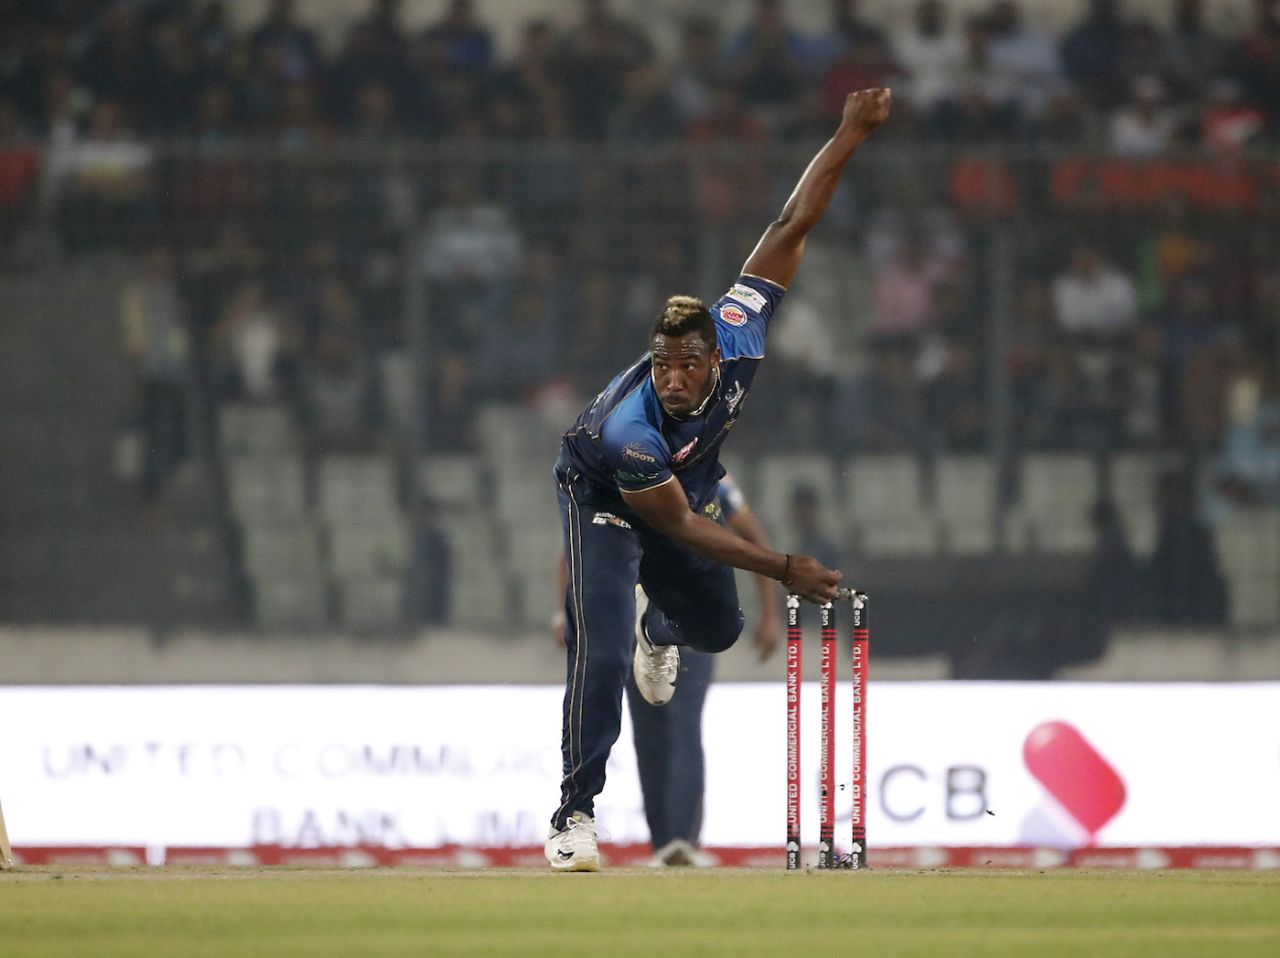 Andre Russell in his delivery stride, Dhaka Dynamites v Rangpur Riders, BPL 2019, 2nd Qualifier, Dhaka, February 6, 2019